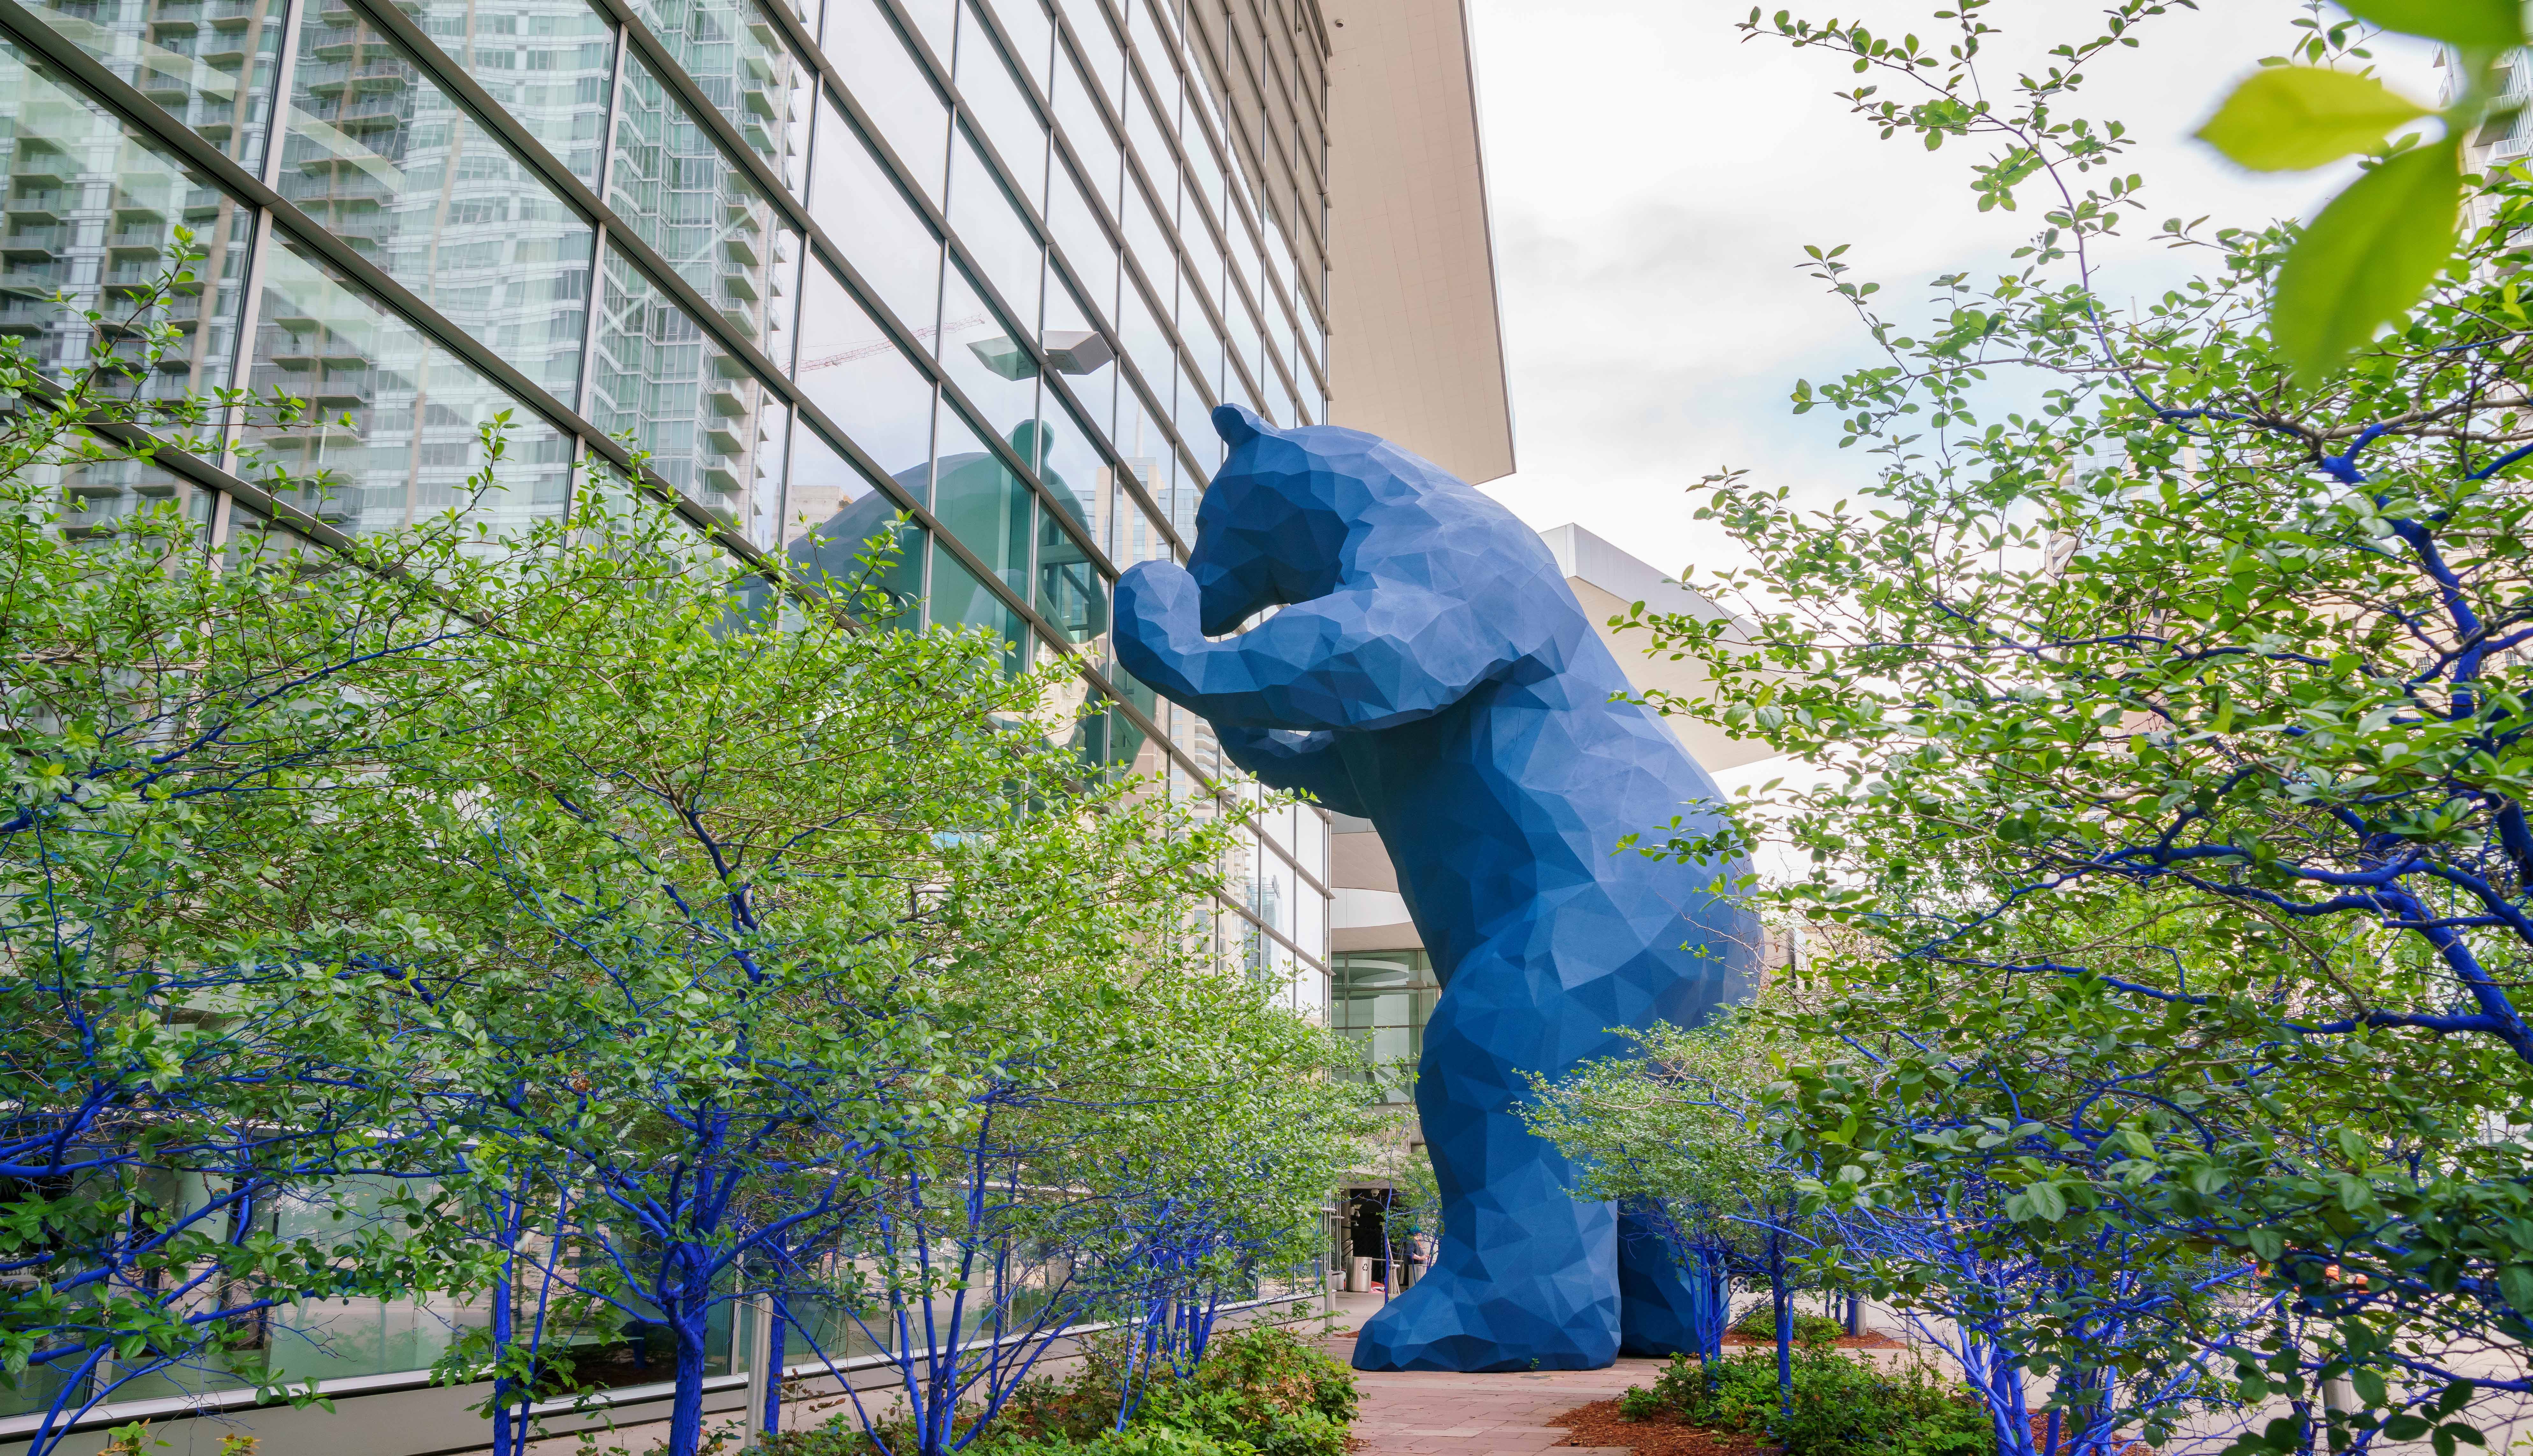 The Big Blue Bear outside of the Colorado Convention Center.